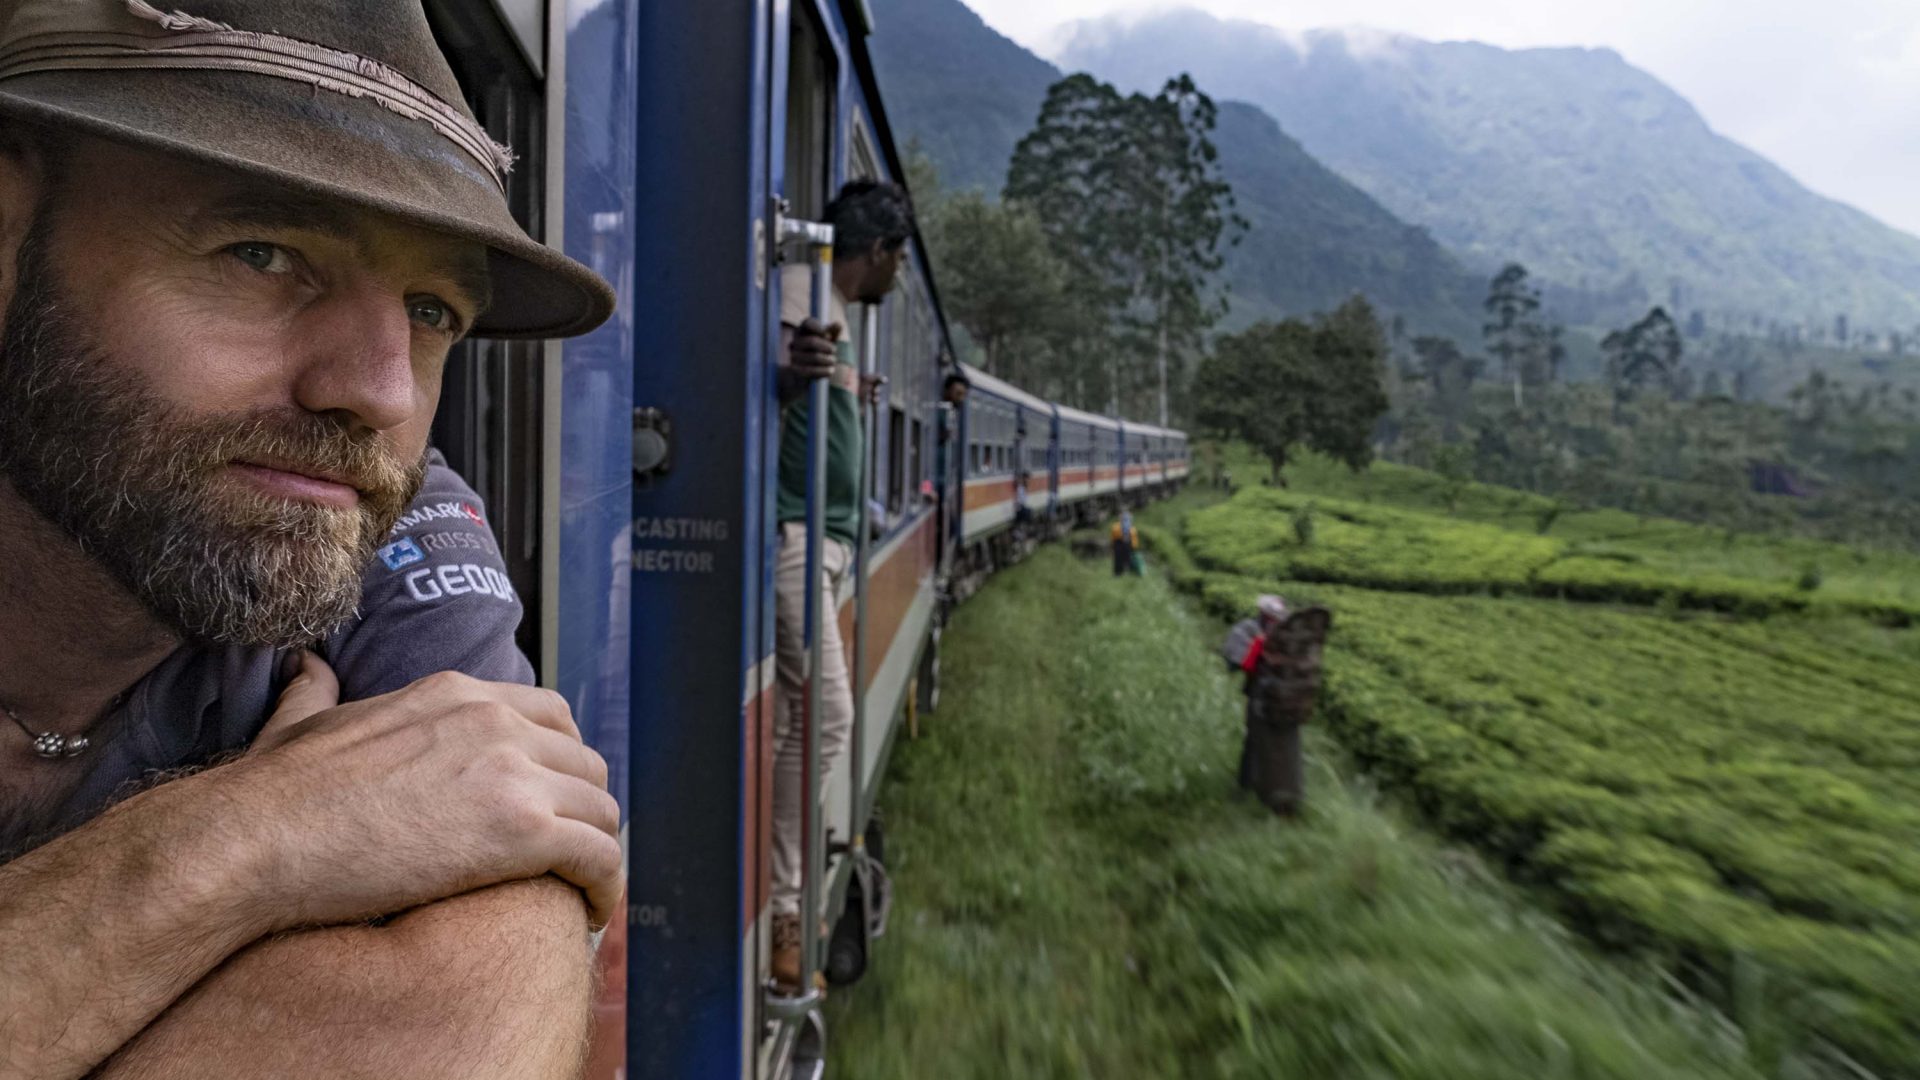 Thor looking out the window of a train in Sri Lanka at green fields and mountains.